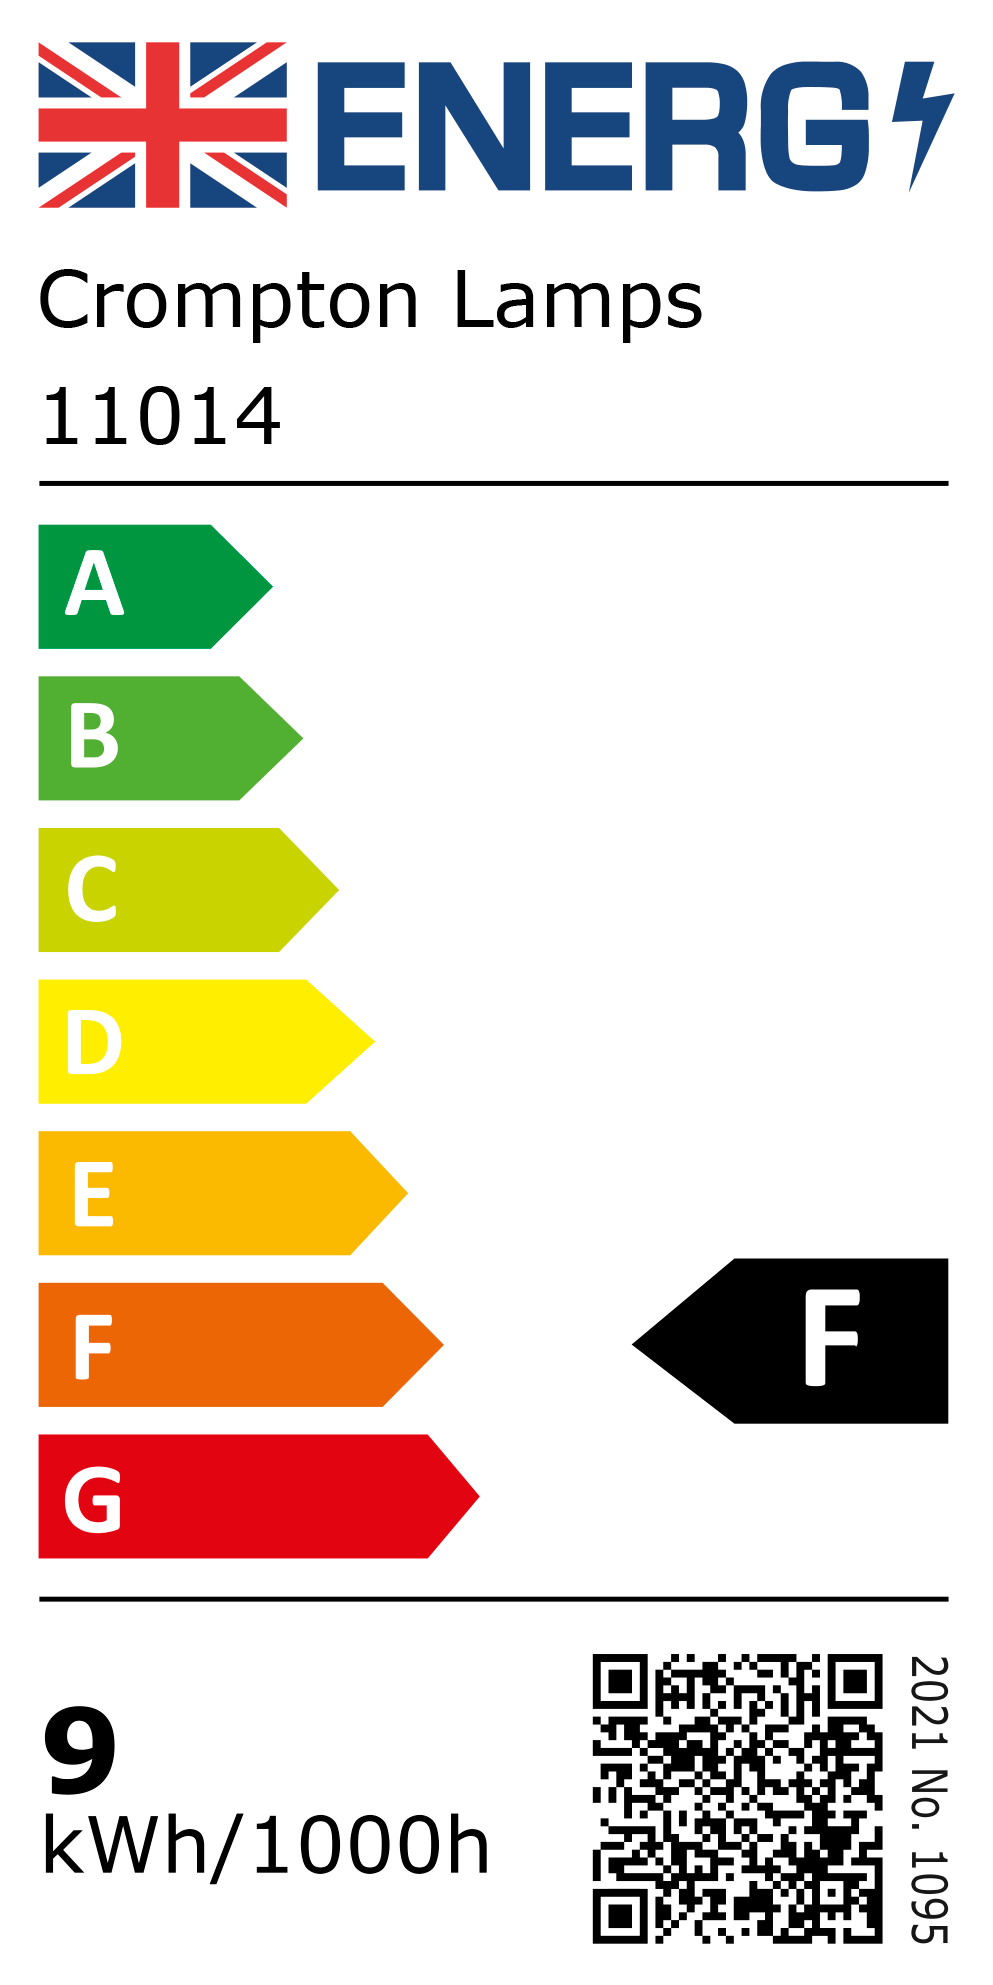 New 2021 Energy Rating Label: Stock Code 11014